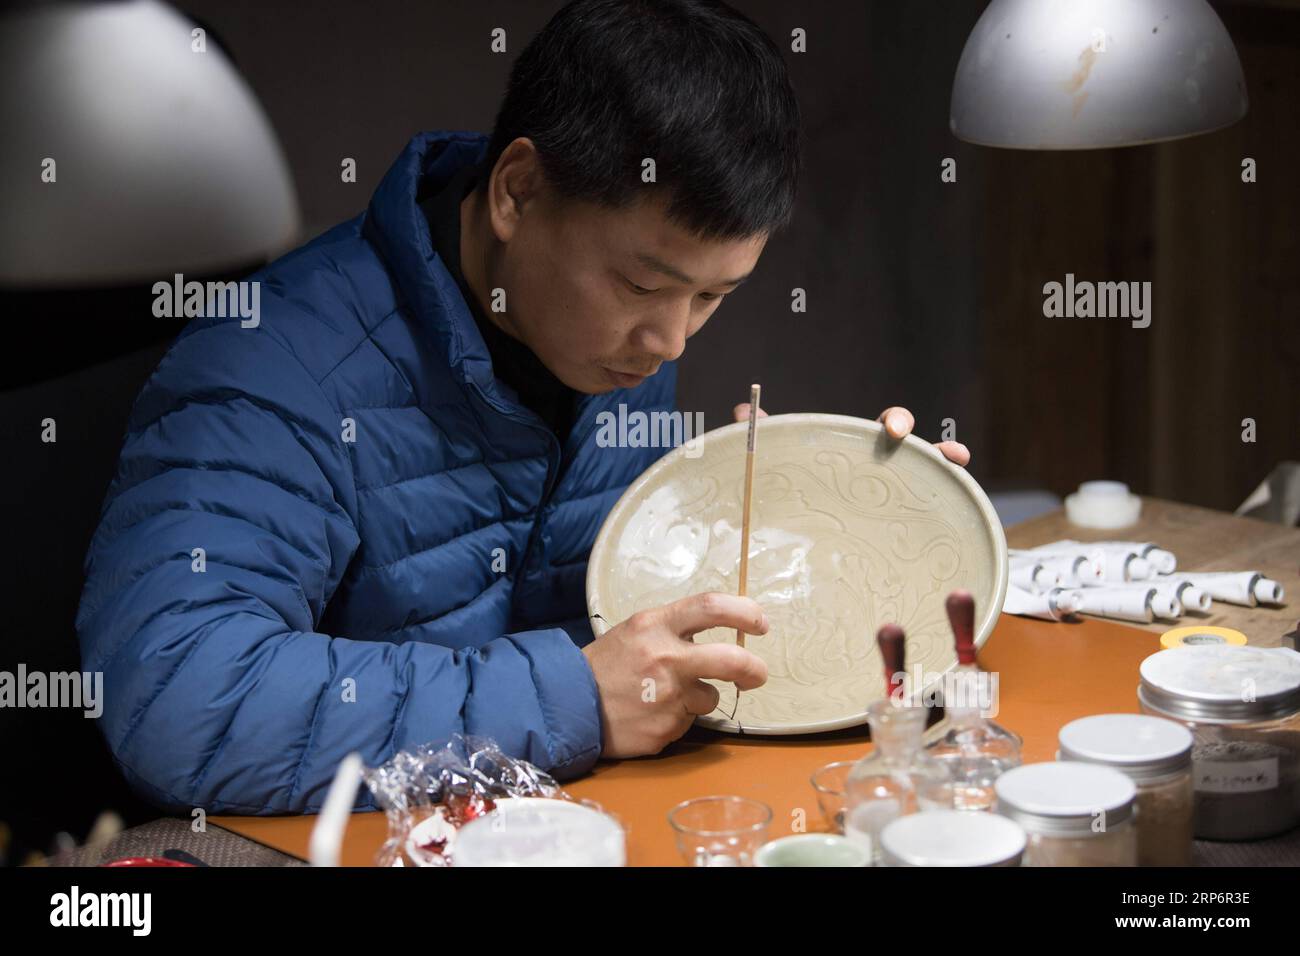 (190119) -- LONGQUAN, Jan. 19, 2019 (Xinhua) -- Wu Rongqiang repairs a celadon ware with lacquer at his studio in Niutouling Village, Longquan City of east China s Zhejiang Province, Jan. 15, 2019. Wu Rongqiang, a Longquan native aged 45, started exploring traditional lacquer art since 2012. In 2017, he moved his family to an old house deep in the mountains in Longquan in order to do more experiments in lacquer undisturbed. He uses lacquer to repair broken porcelain and to create lacquerware. Also, he experiments on the production of various lacquers. I feel so pleased to return to my hometown Stock Photo